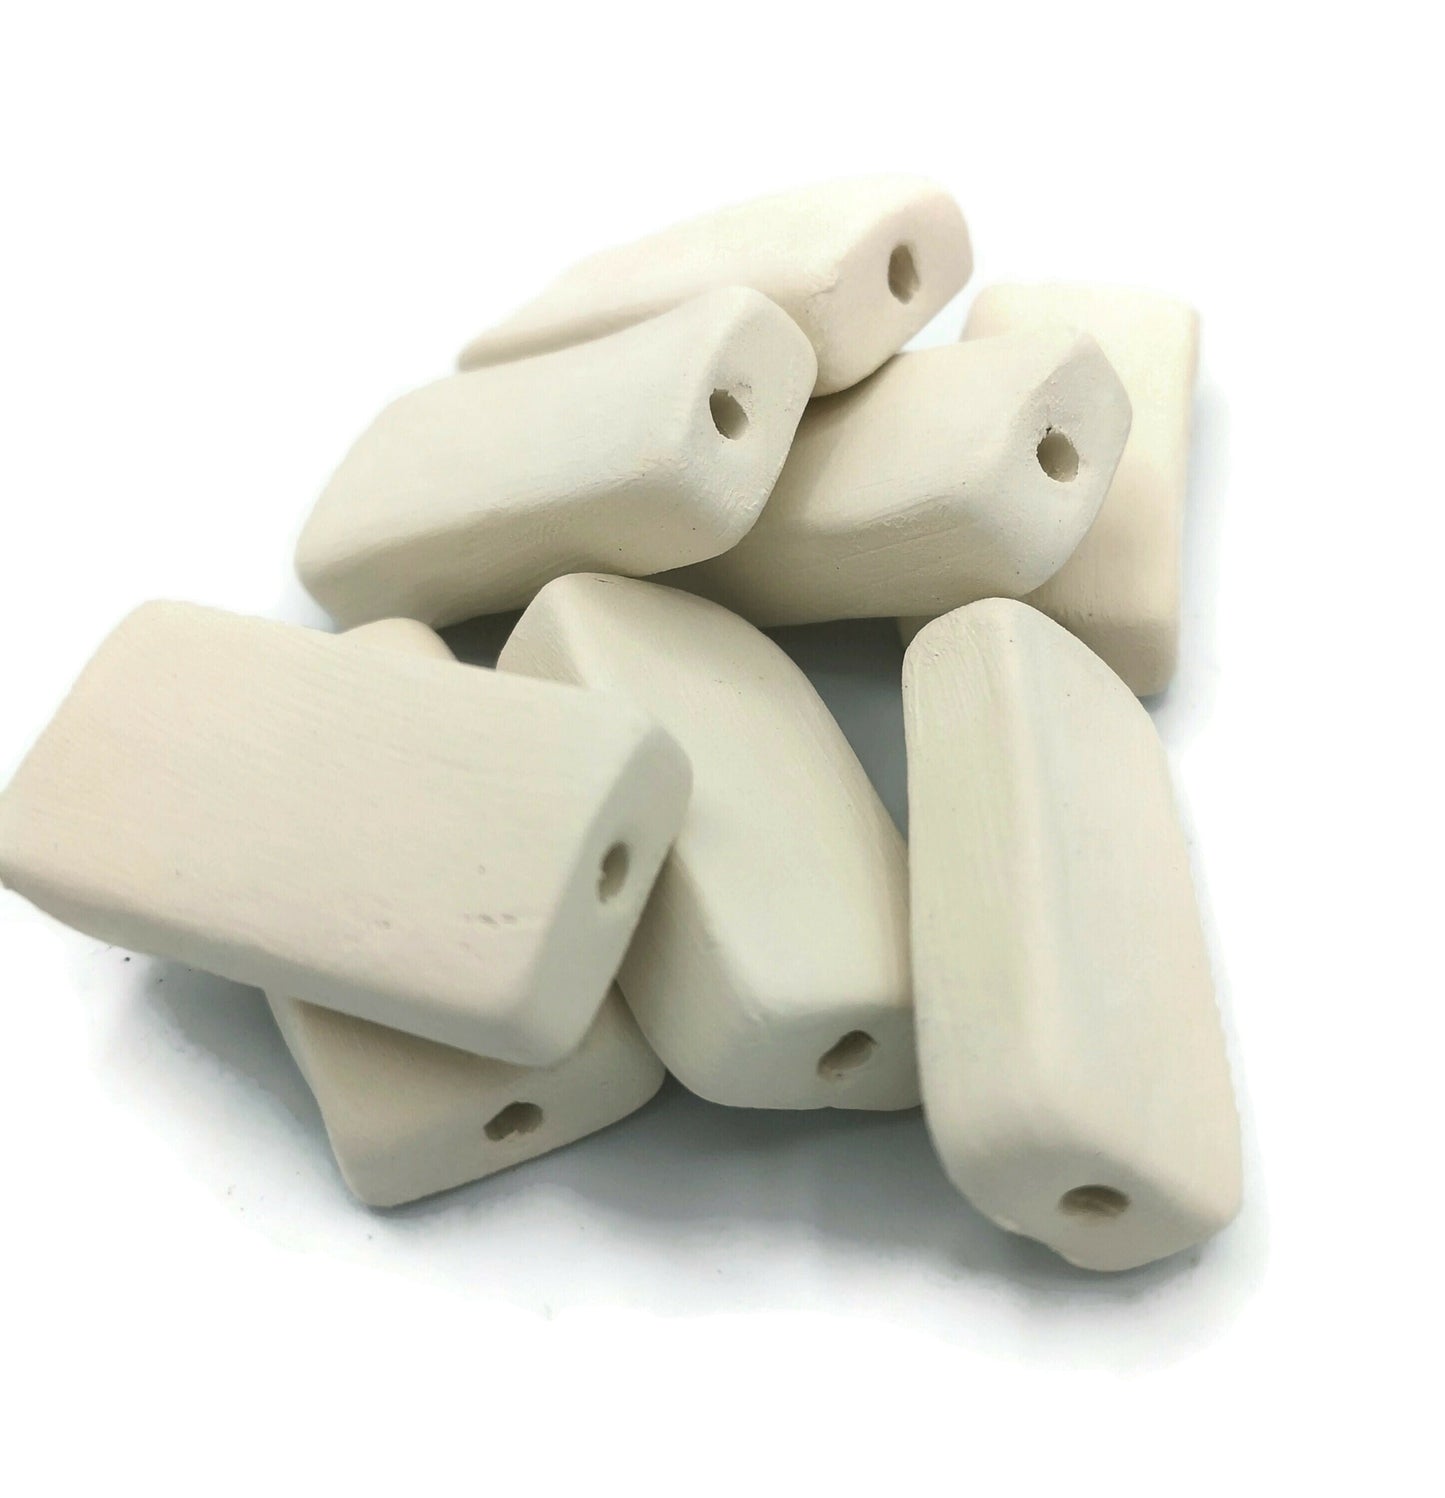 Handmade Ceramic Macrame Bisque Beads Large, Unique Rectangle Beads Ready To Paint, Best Sellers Clay Beads, Artisan Jewelry Making Beads - Ceramica Ana Rafael